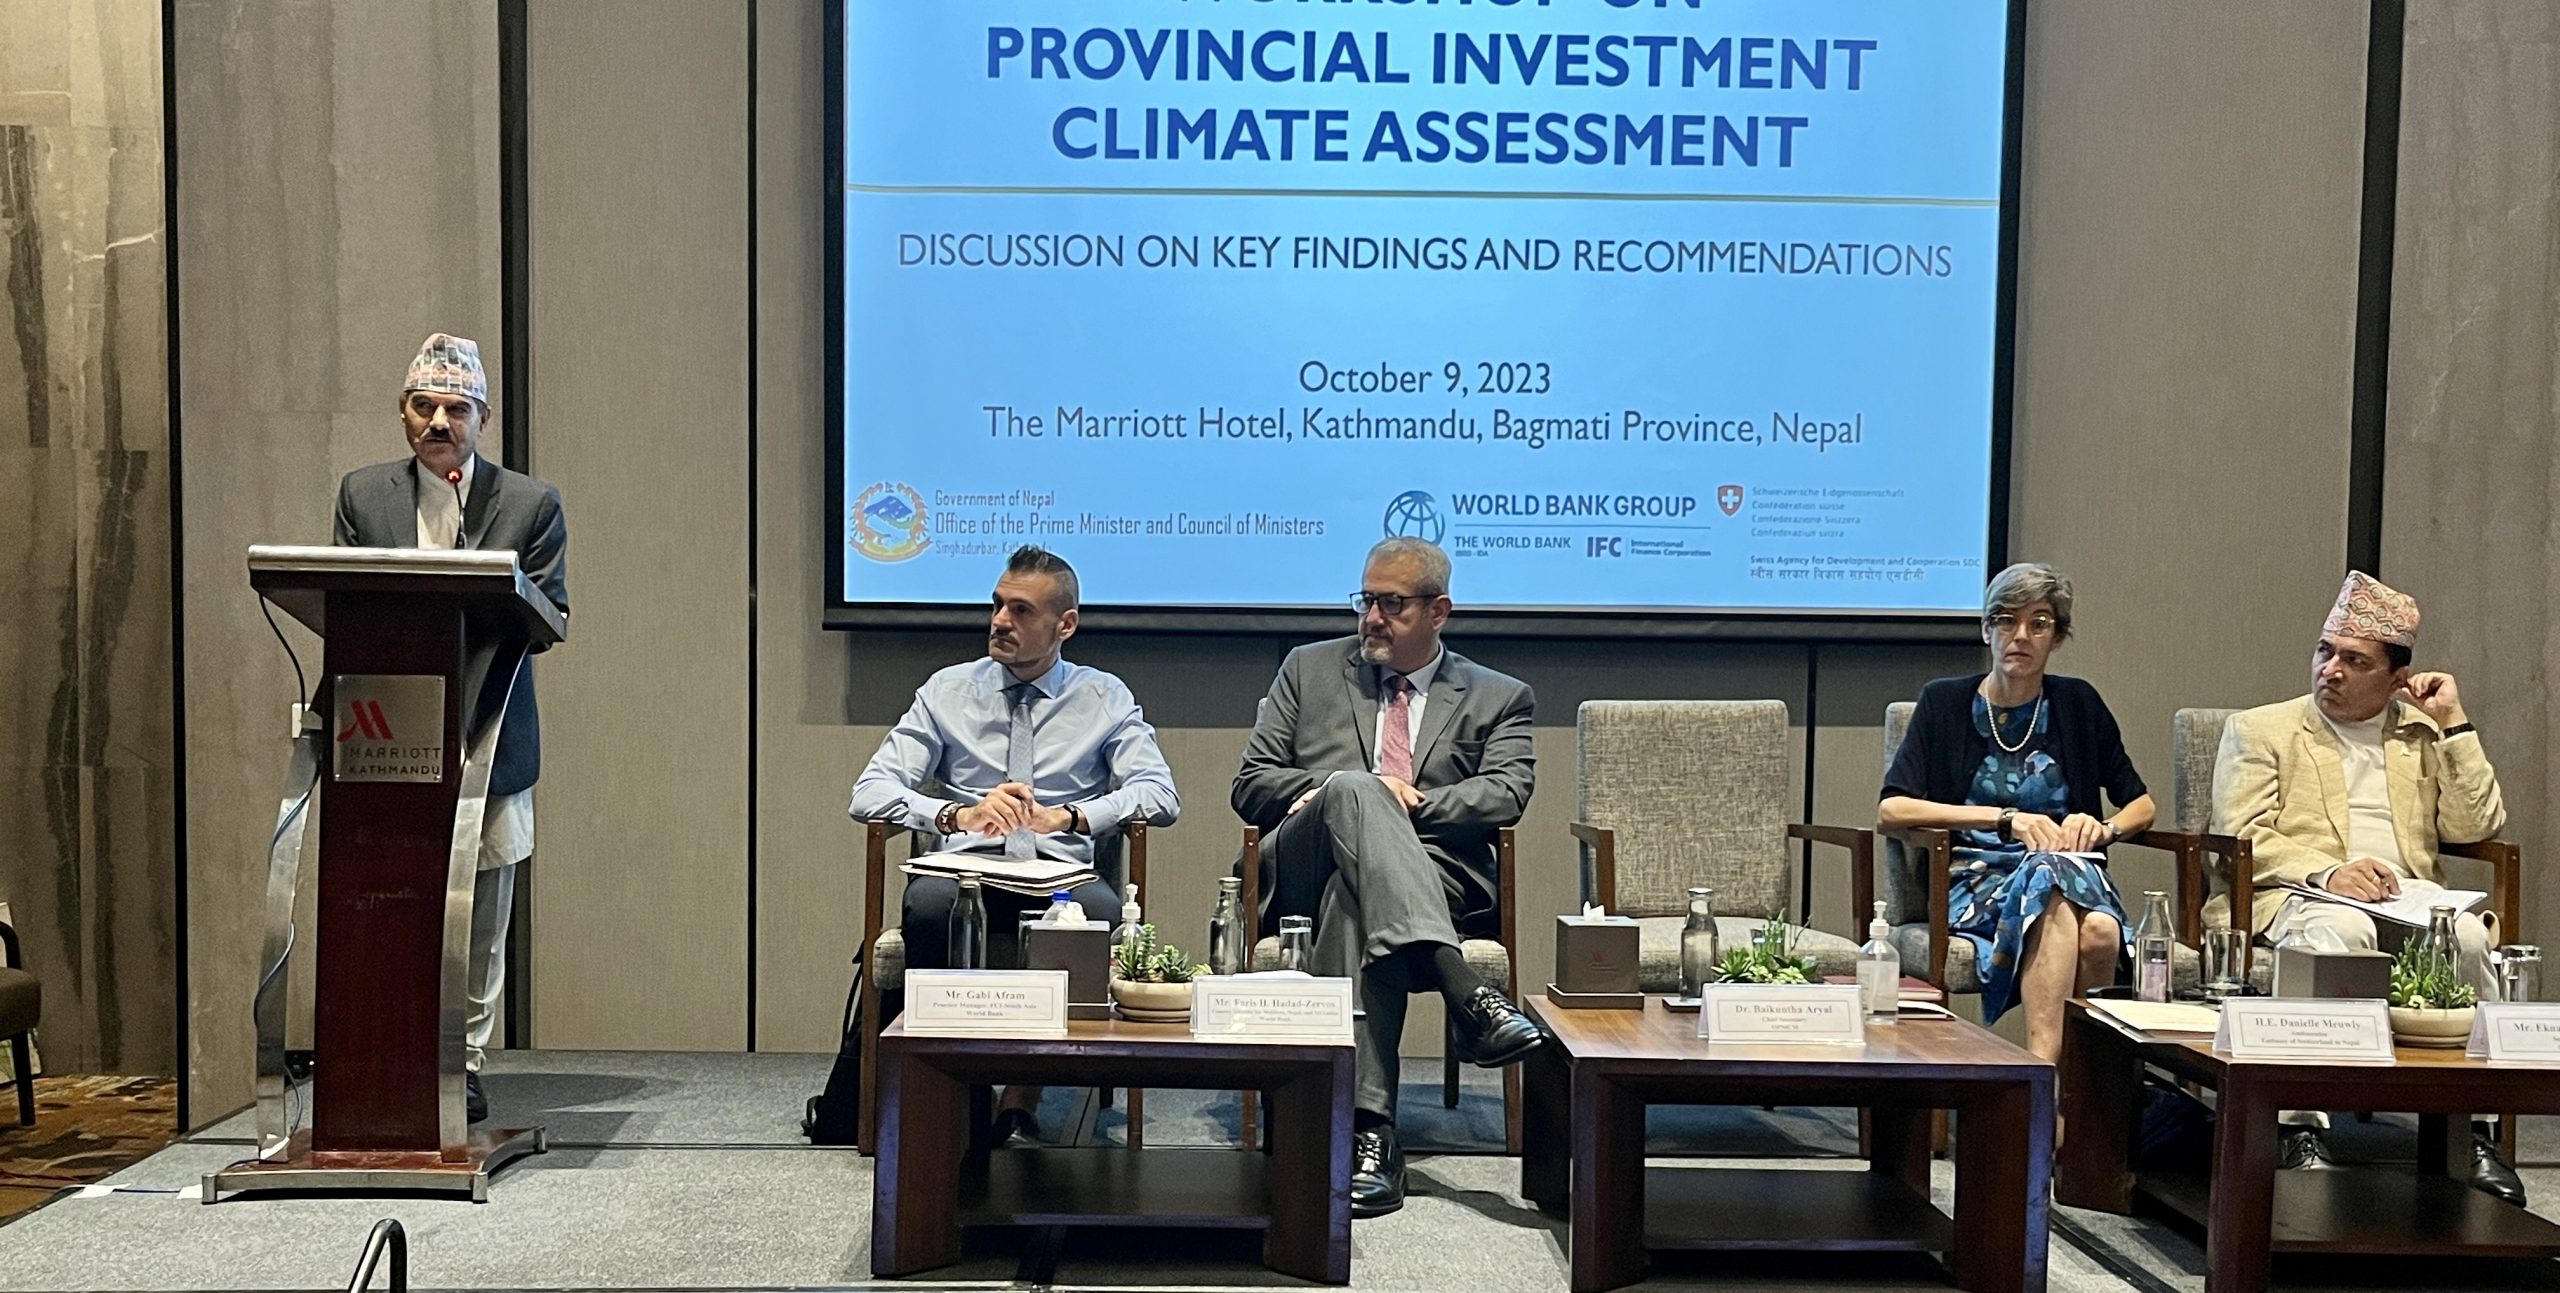 Govt expresses commitment to boost investment climate in provinces